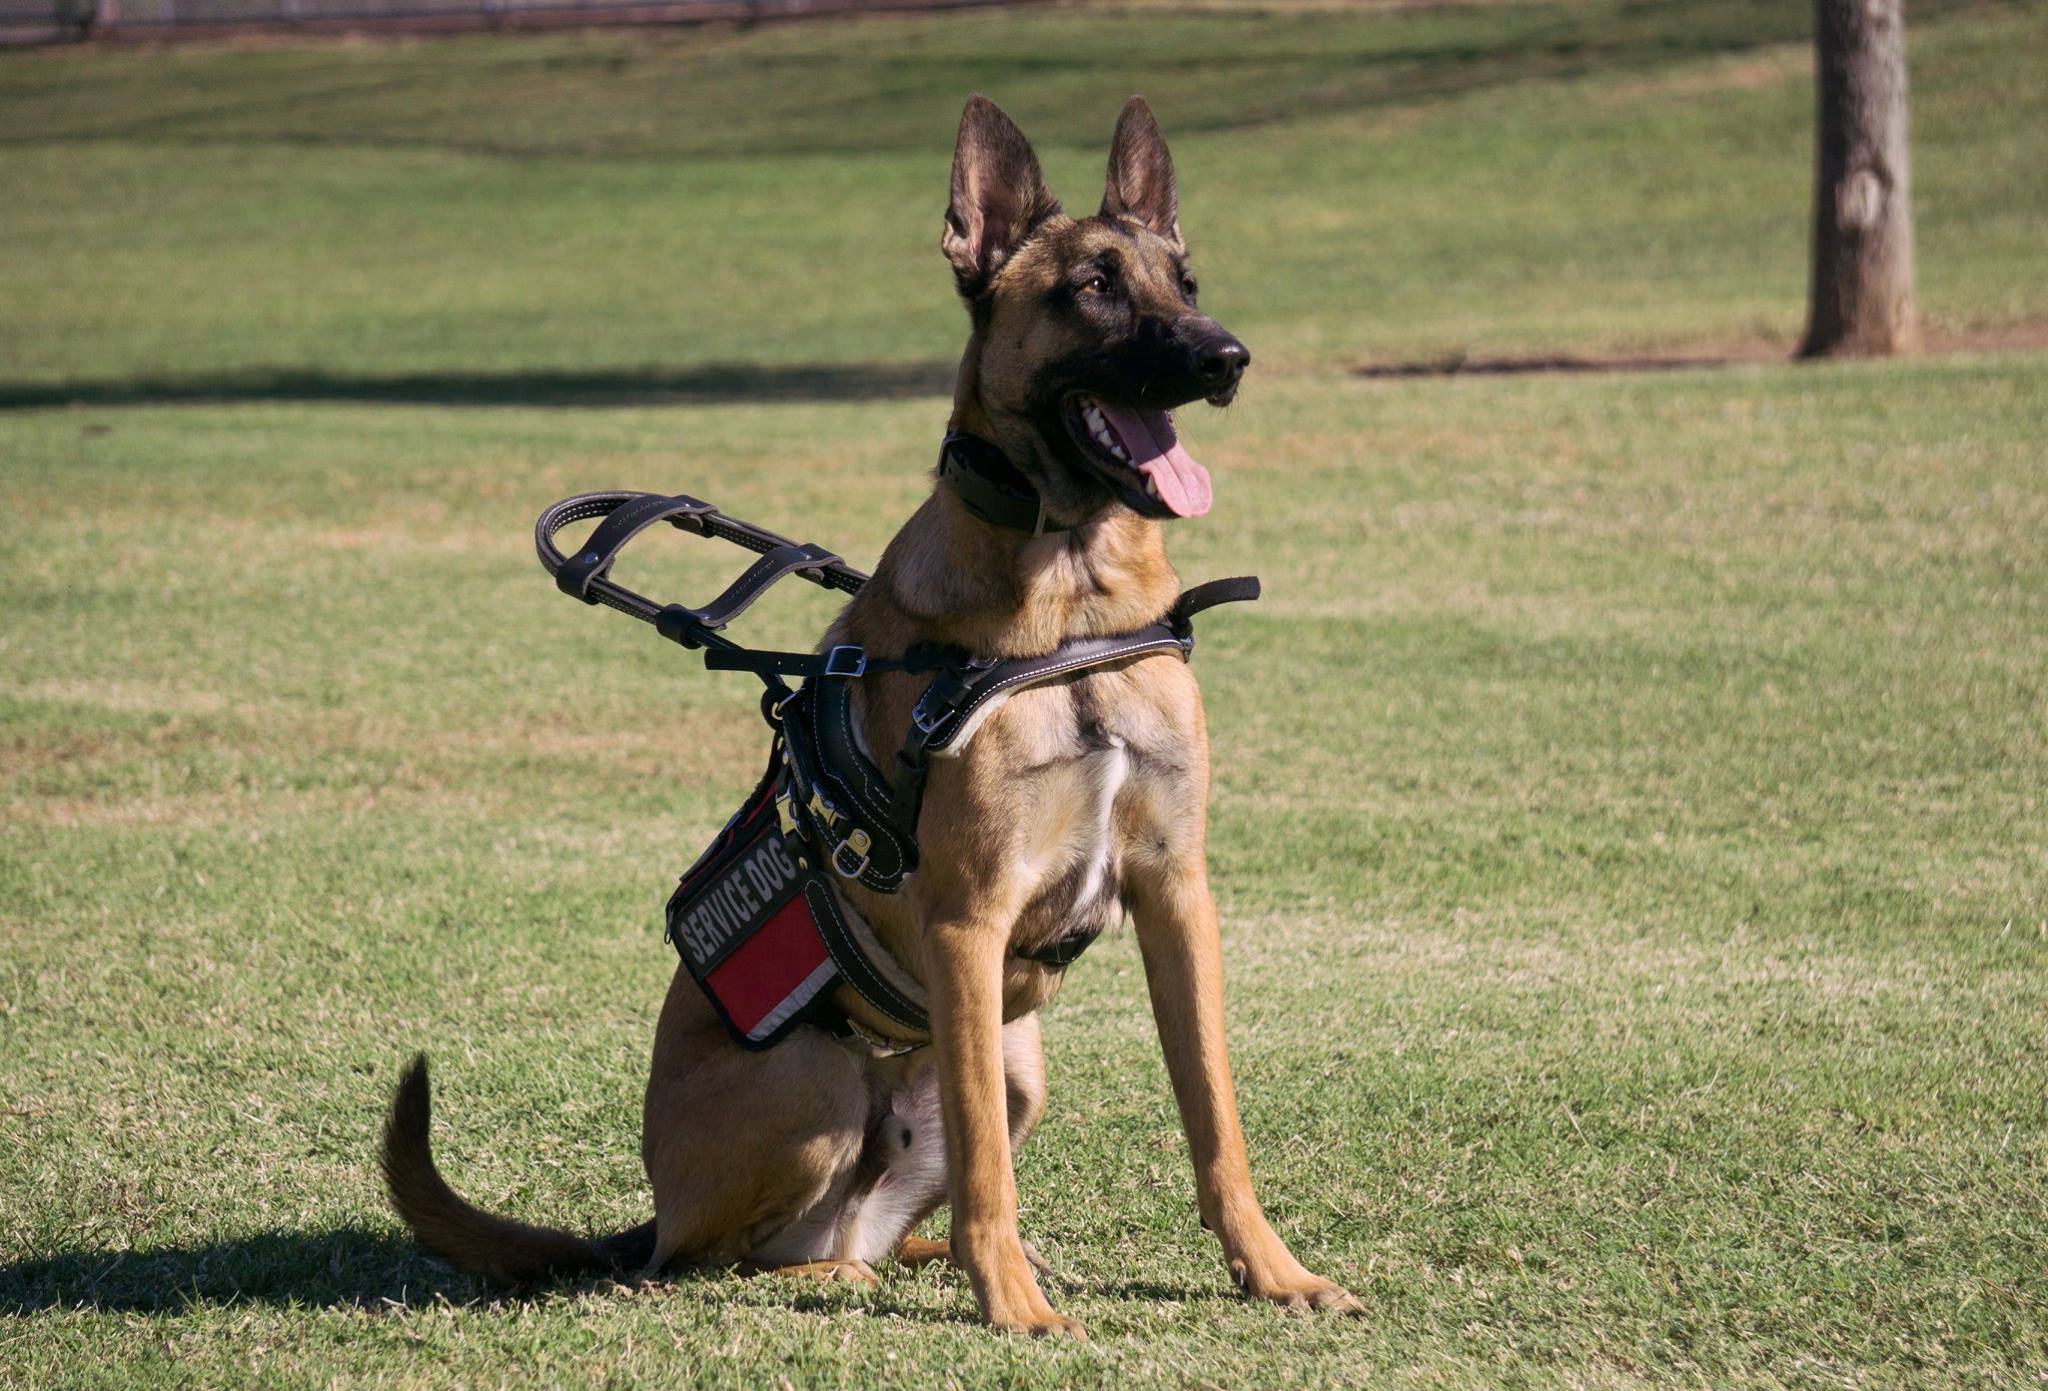 Spending Your Summer with a Service Dog in Baton Rouge